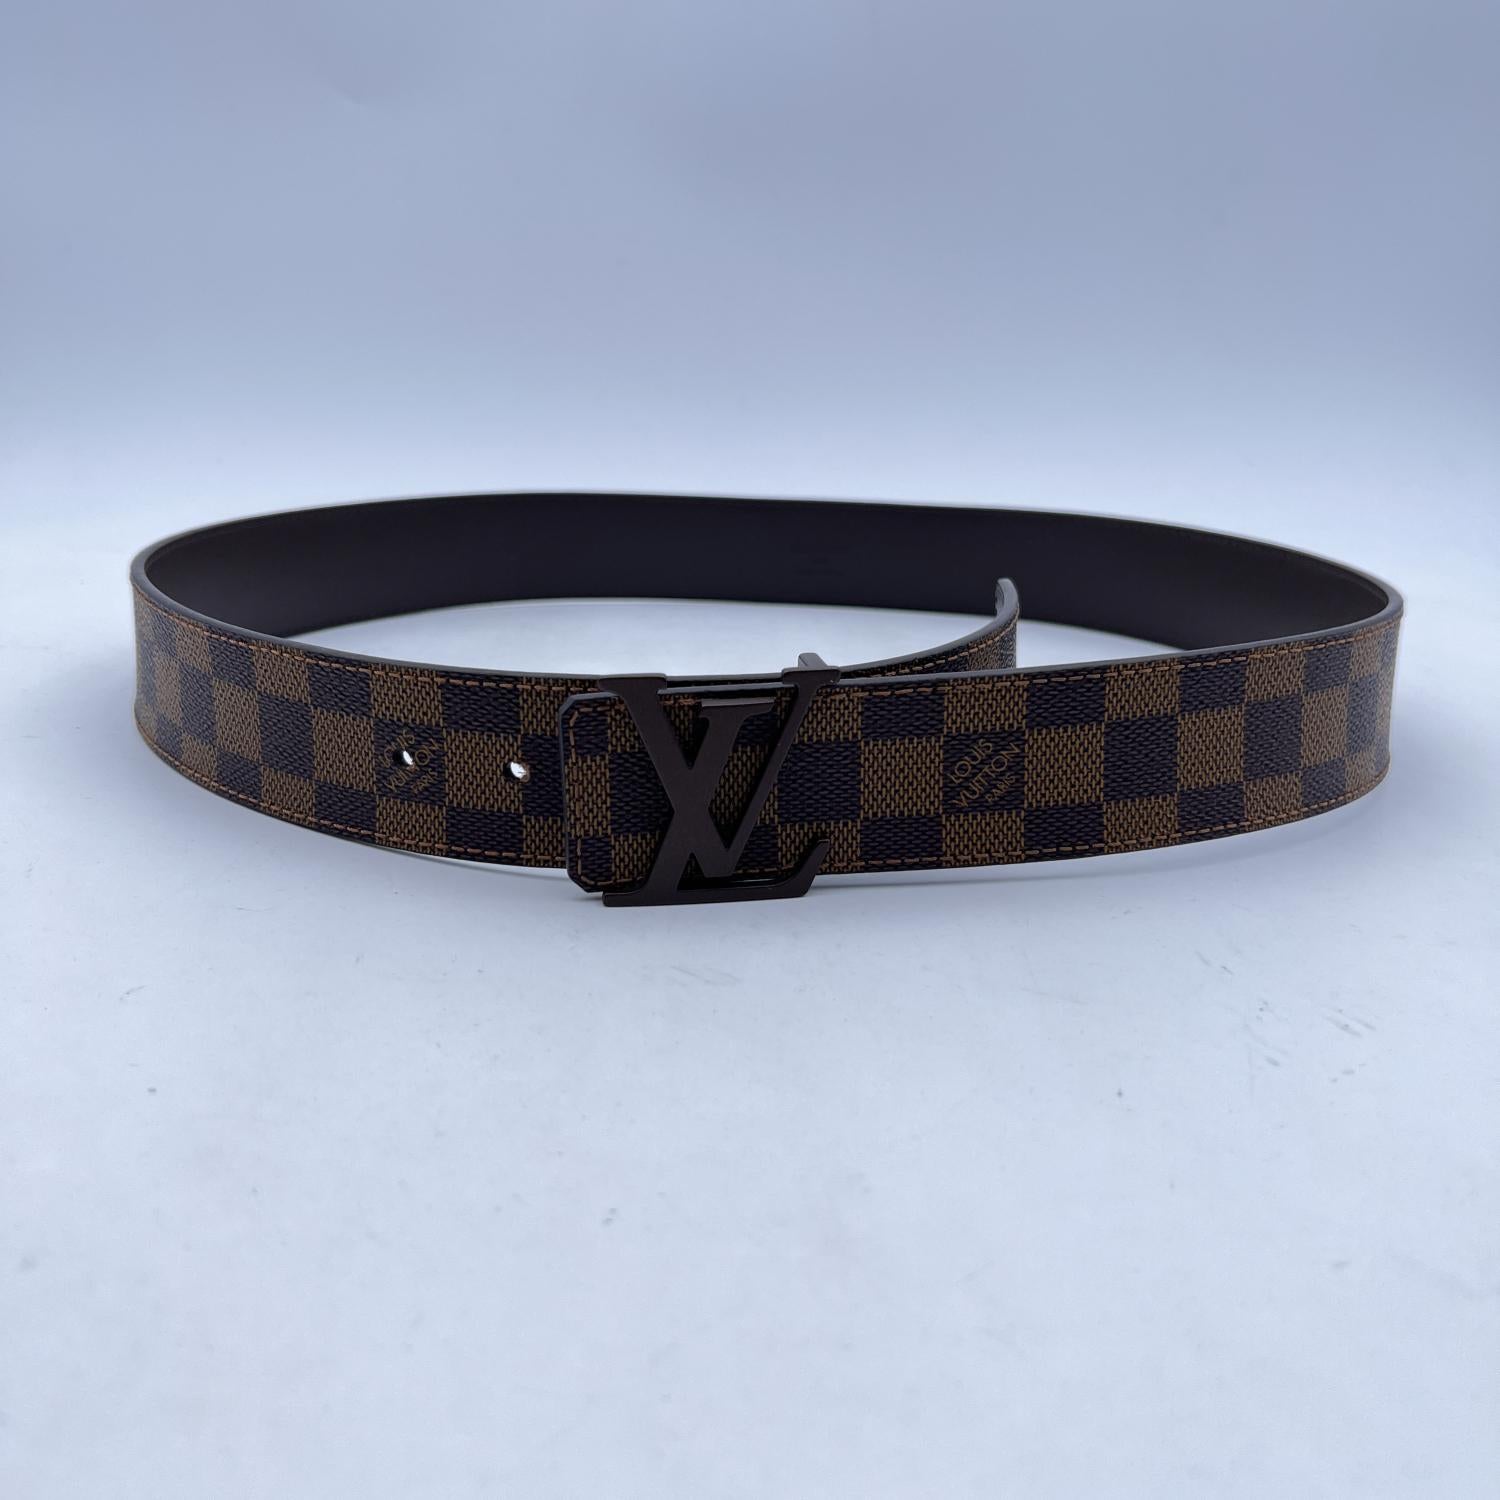 LOUIS VUITTON Brown Damier Ebene Belt . The belt features an LV logo buckle. Five holes adjustment. Size 95/38. Width: 1.5 inches - 4 cm. Total length: 44 inches- 111.7 cm. From first notch to buckle: 38.5 inches - 97.8 cm. From last notch to